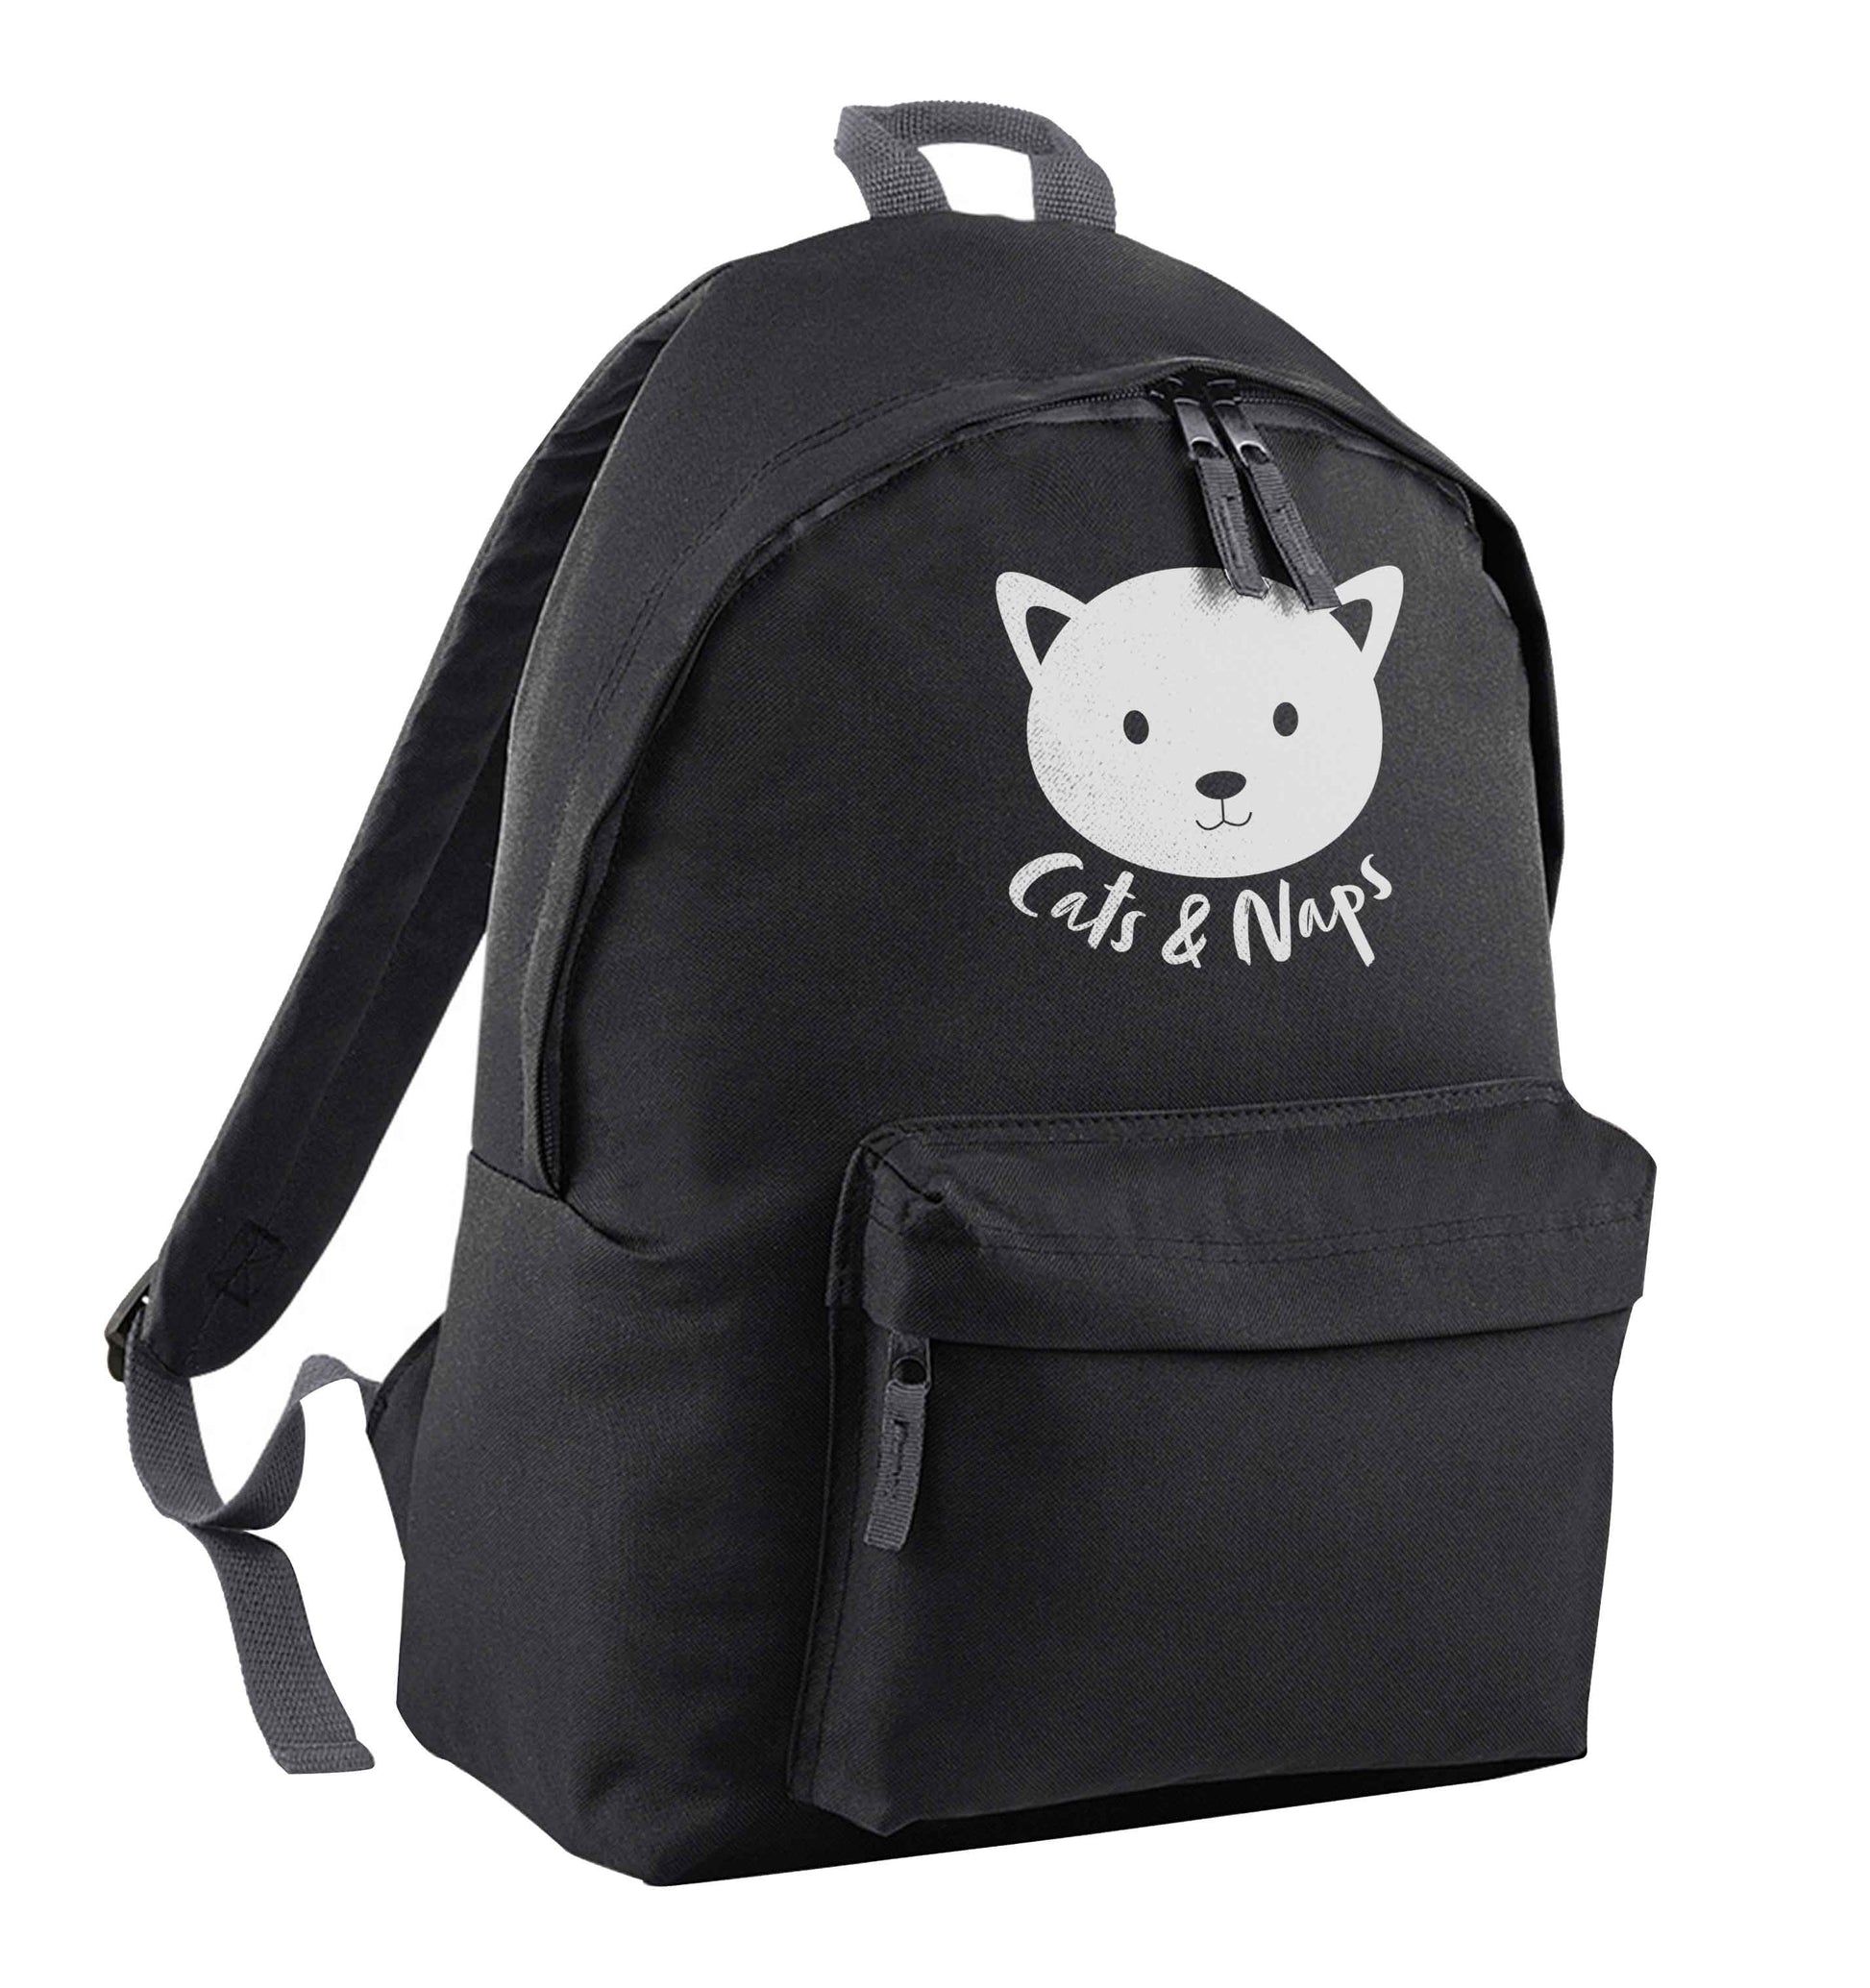 Cats and naps Kit black children's backpack